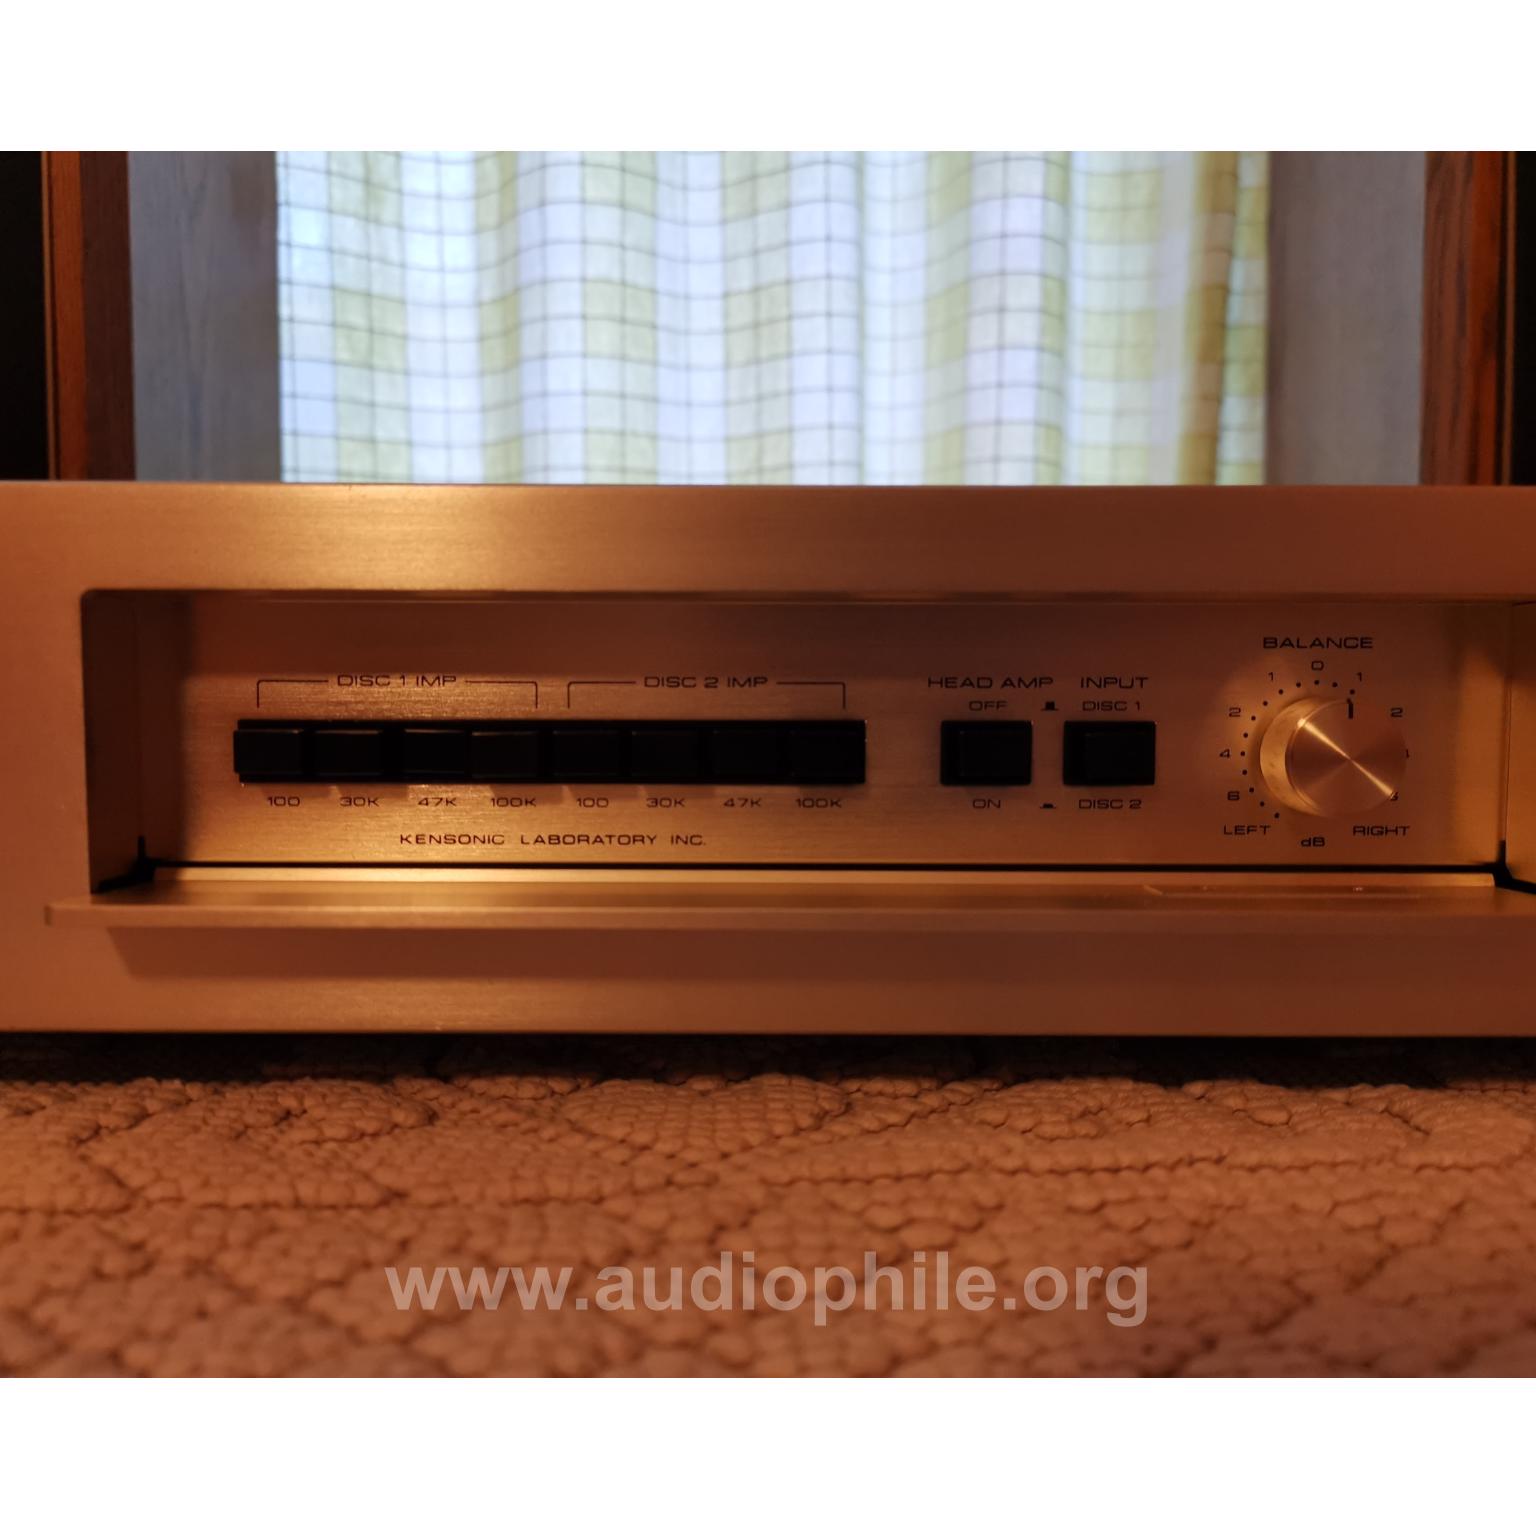 Accuphase c-220 phono eq. pre